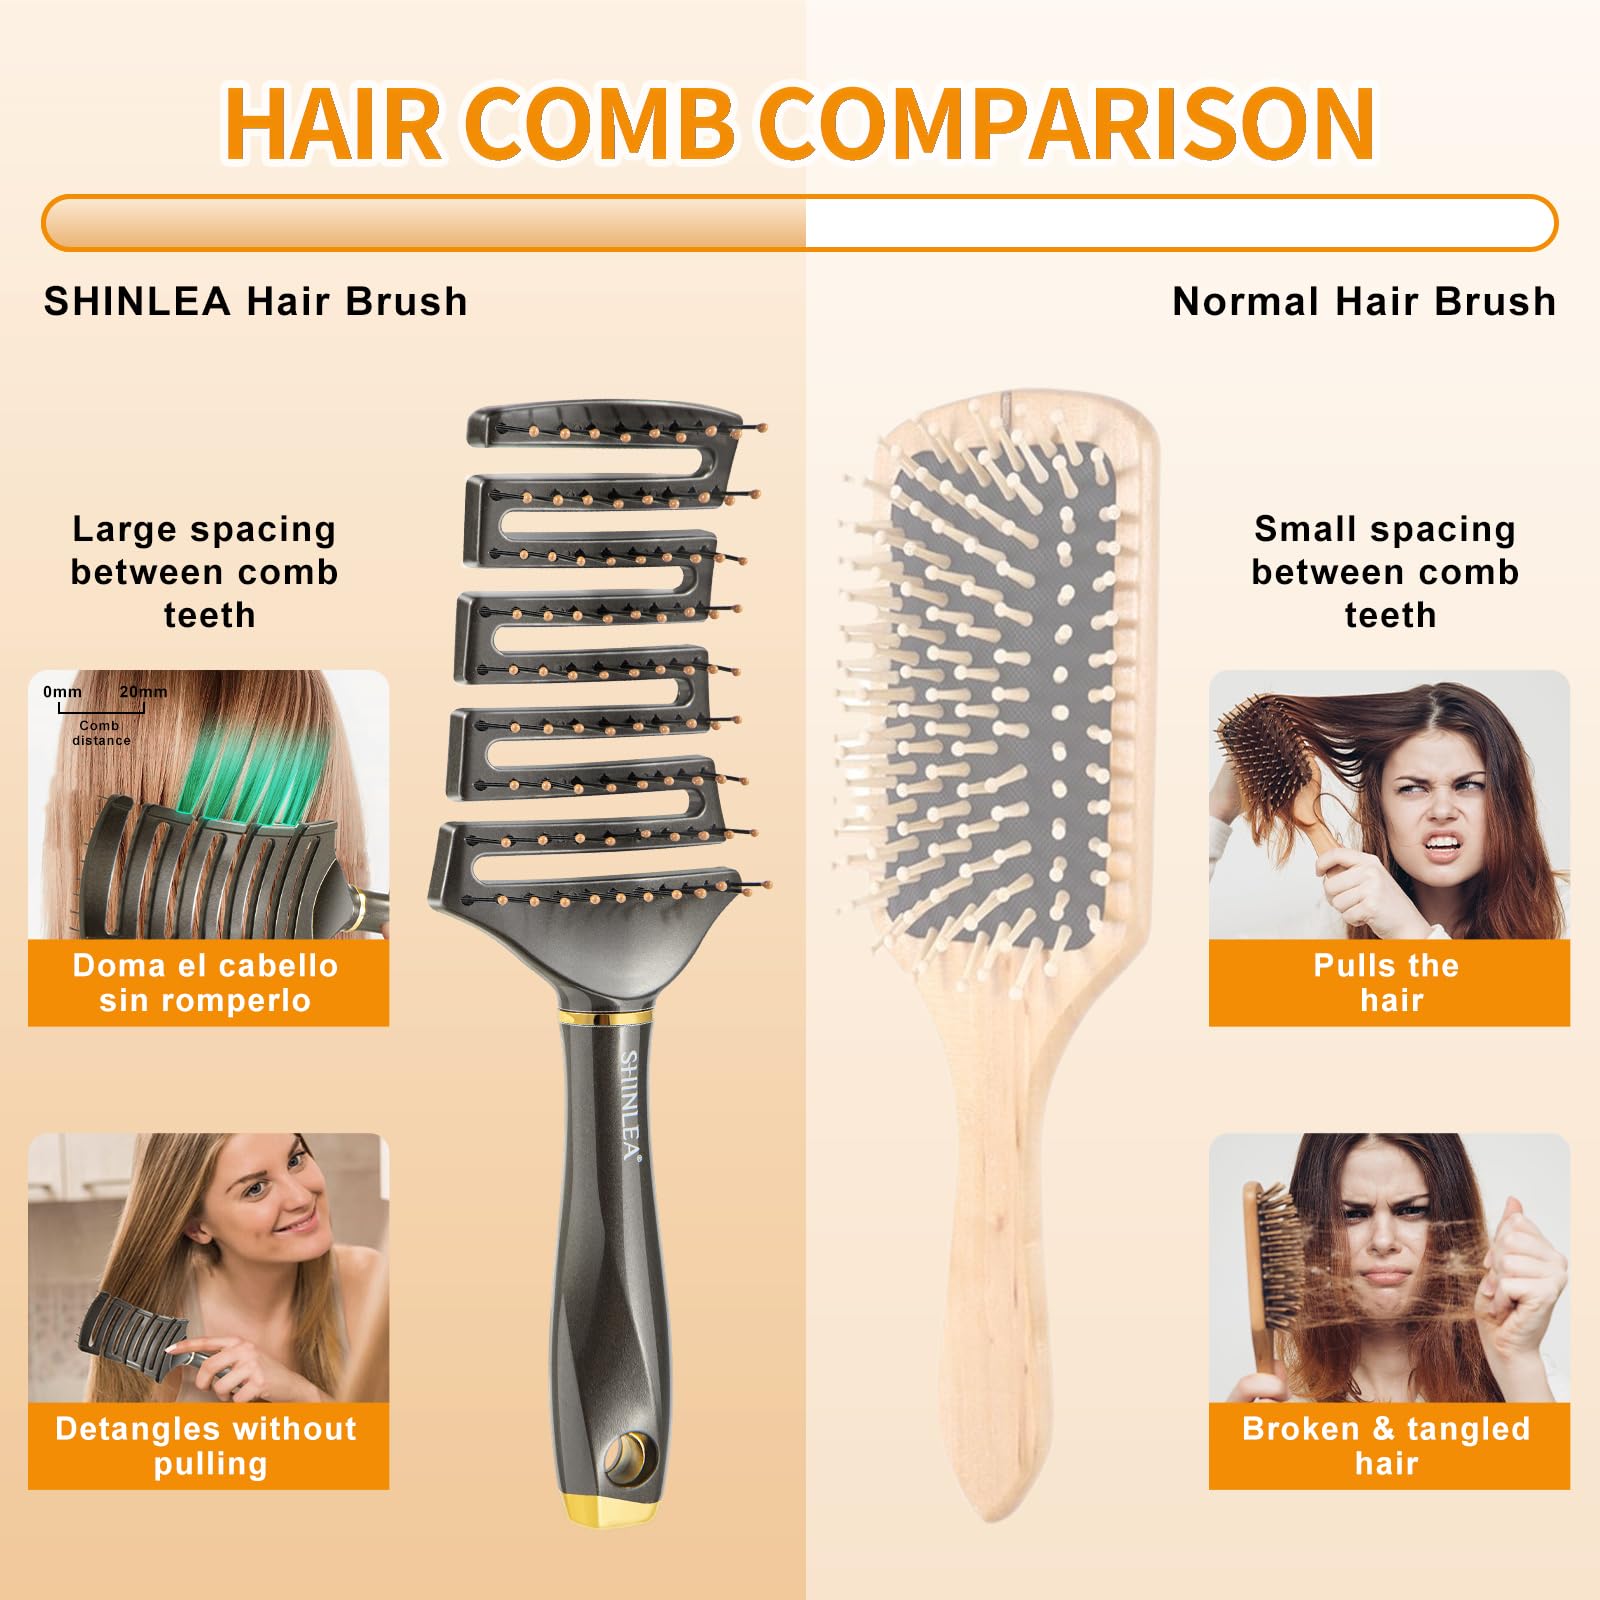 SHINLEA Detangle Hair Brush - Curved Vented Detangling Brush for Curly Thick Hair Blow Drying - Professional Paddle Vent for Wet & Dry Hair, Elastic Anti-Tangle Detangler Brush, Valentines Gifts